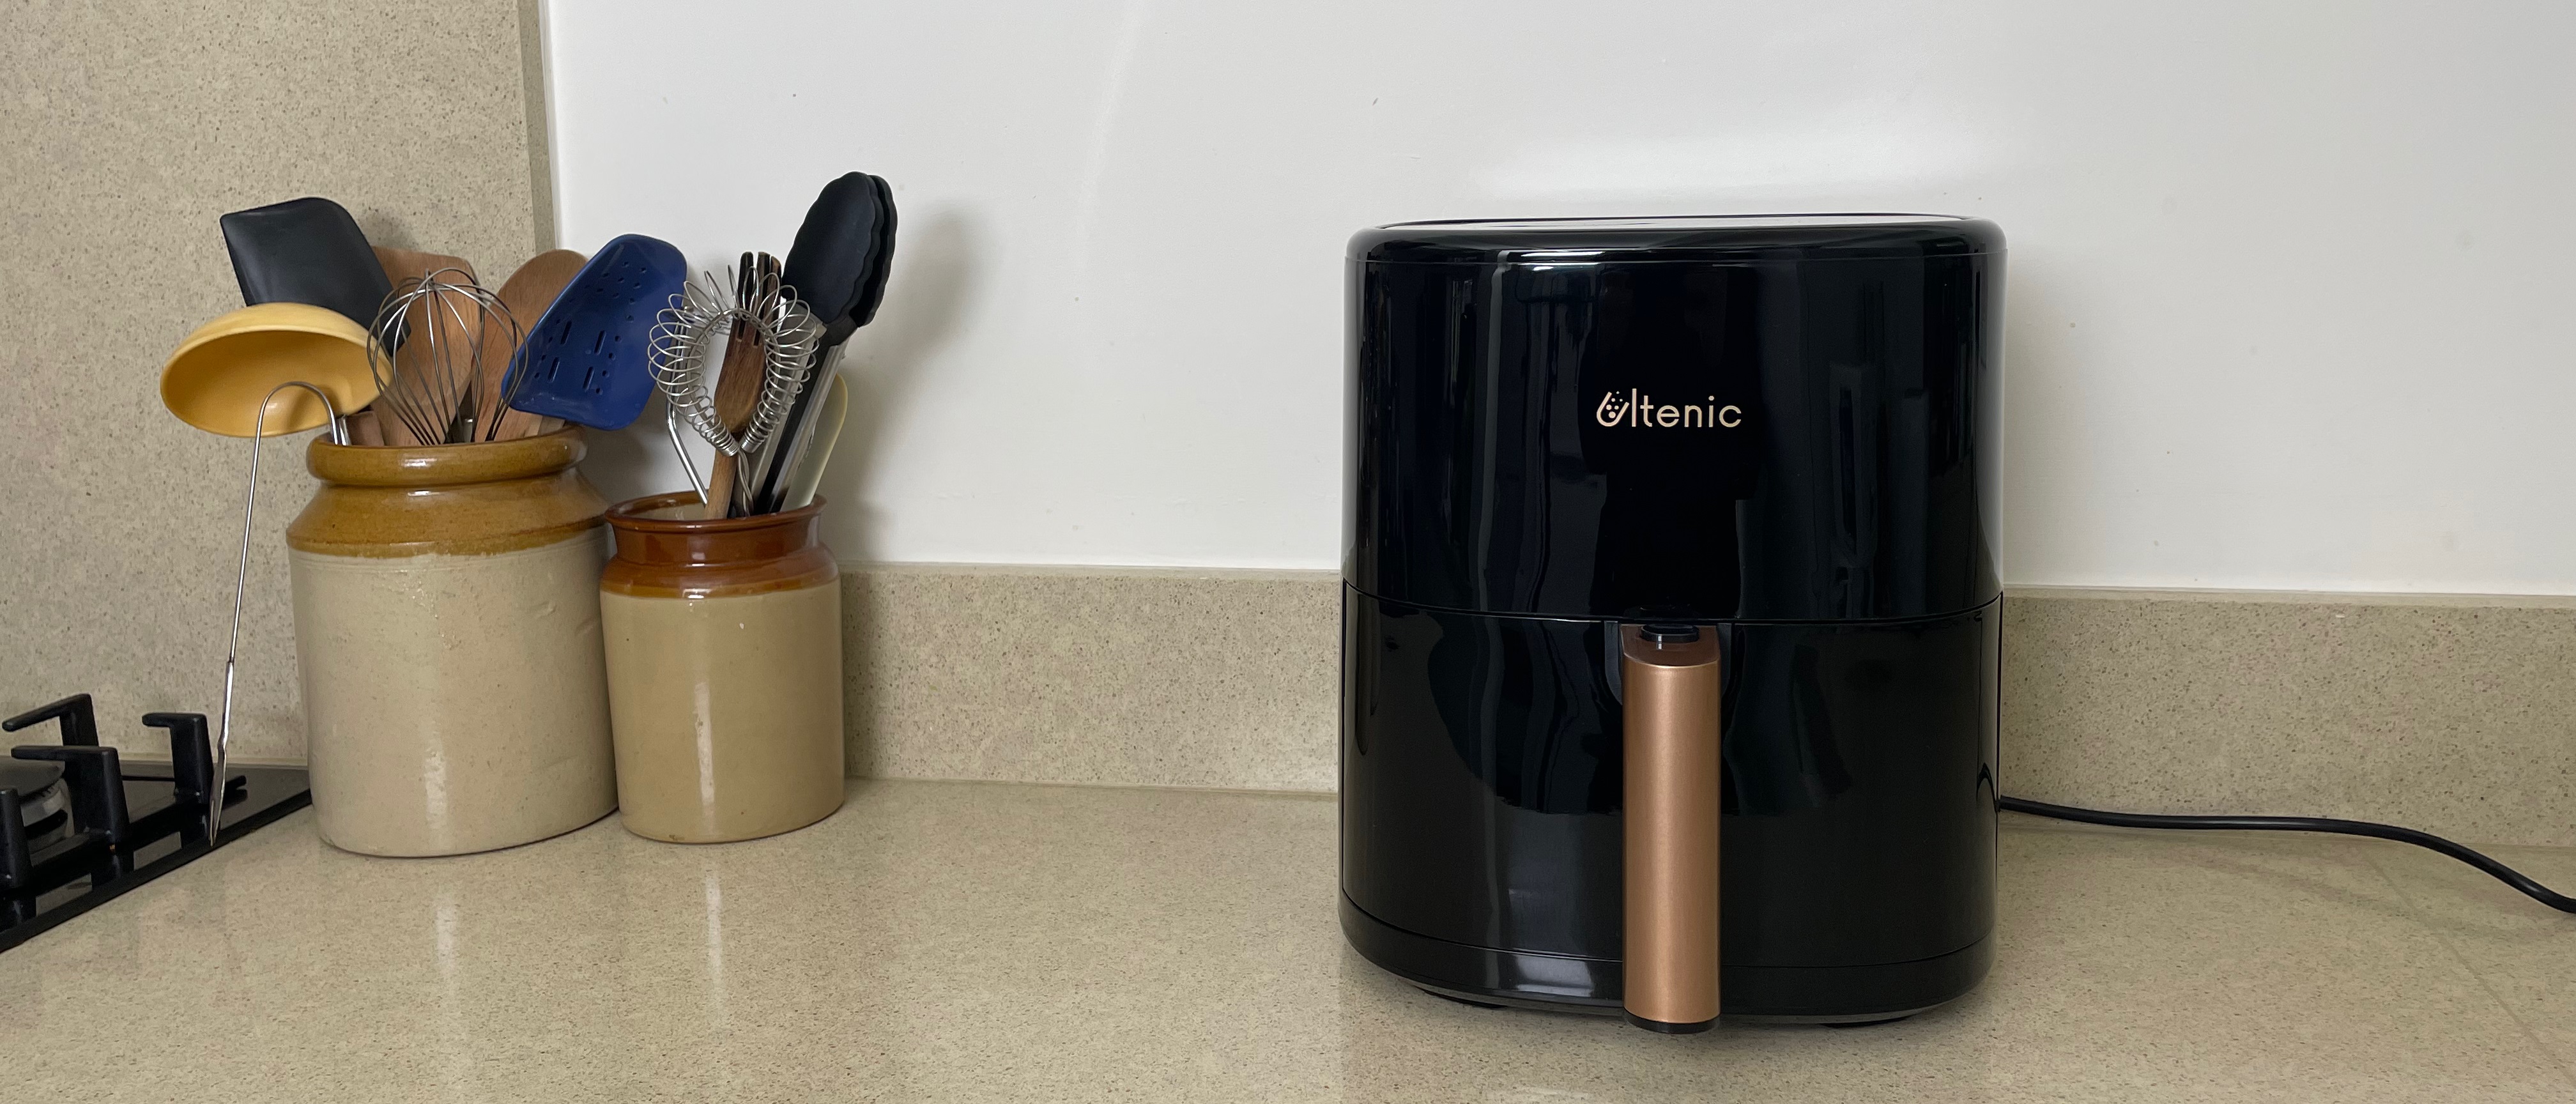 Off Grid Cooking With An Ultenic K20 Airfryer 